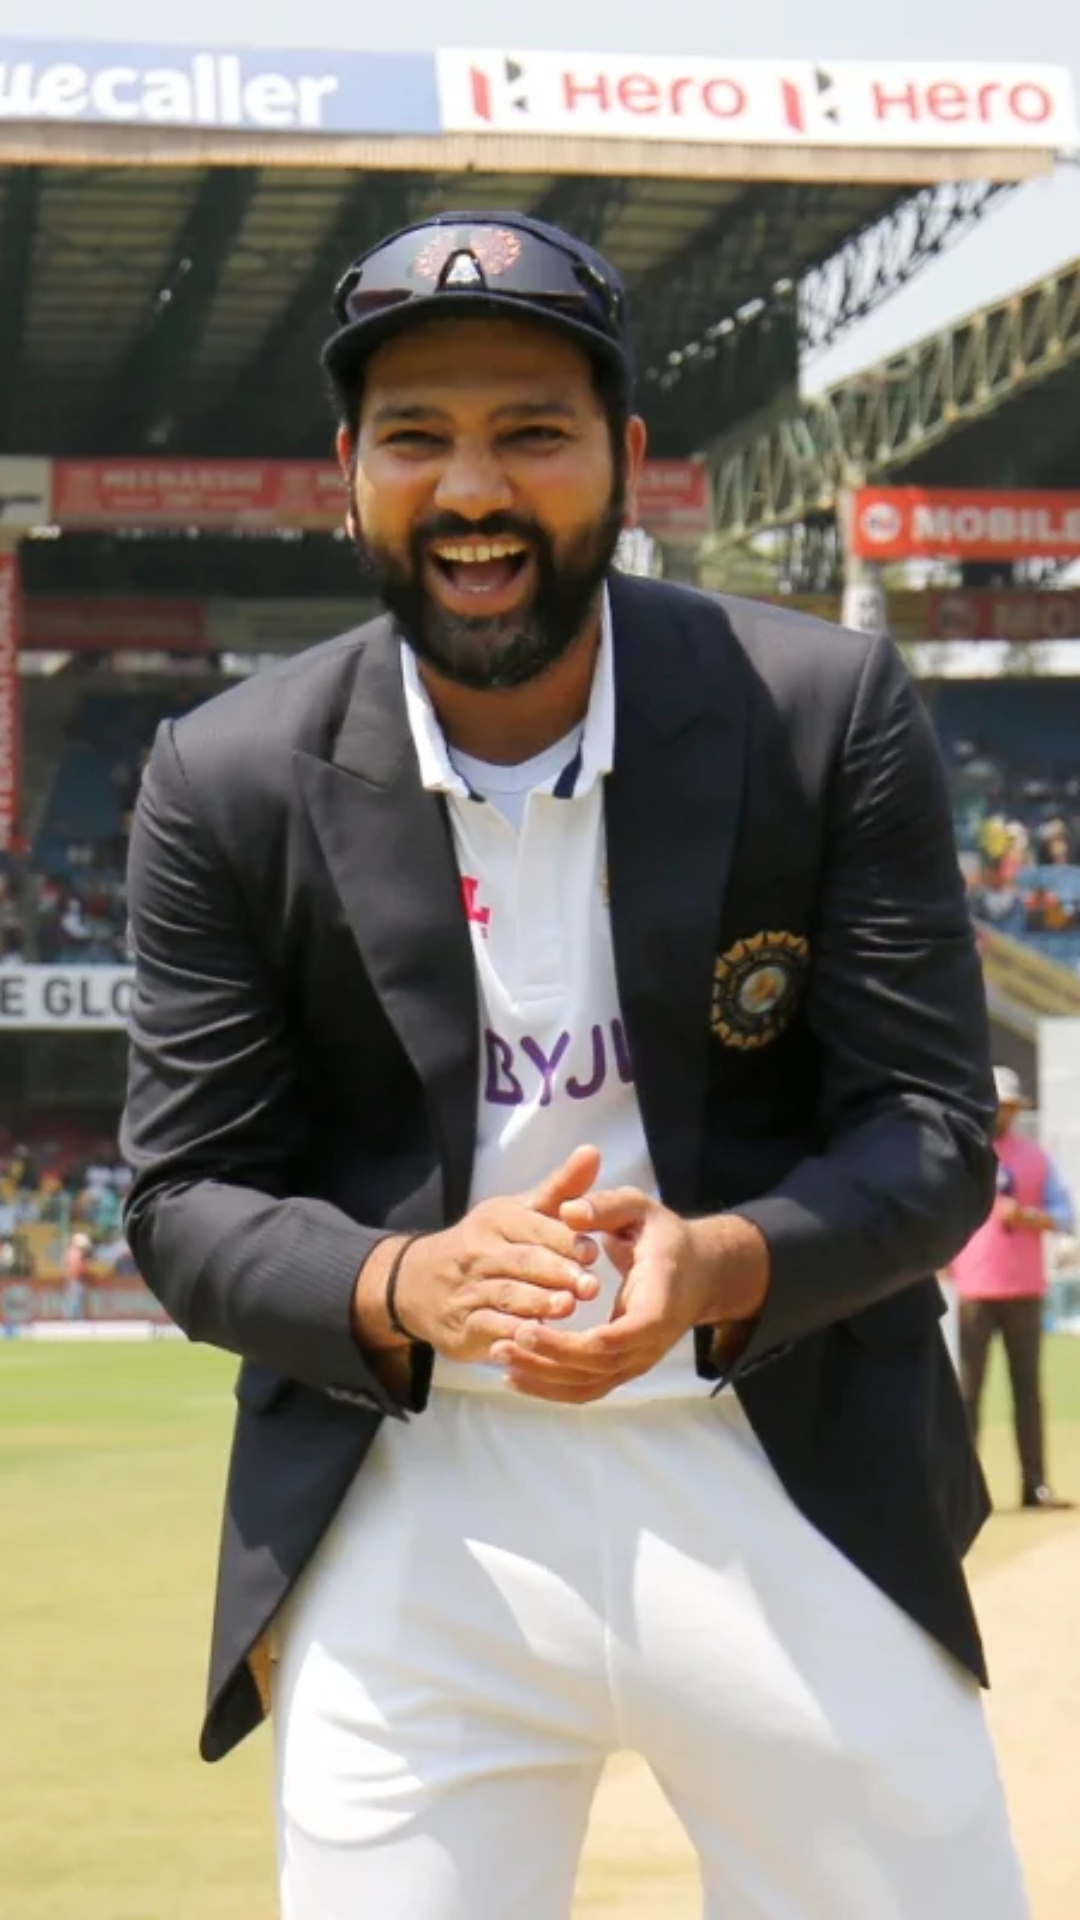 India's Test record under Rohit Sharma along with skipper's personal numbers